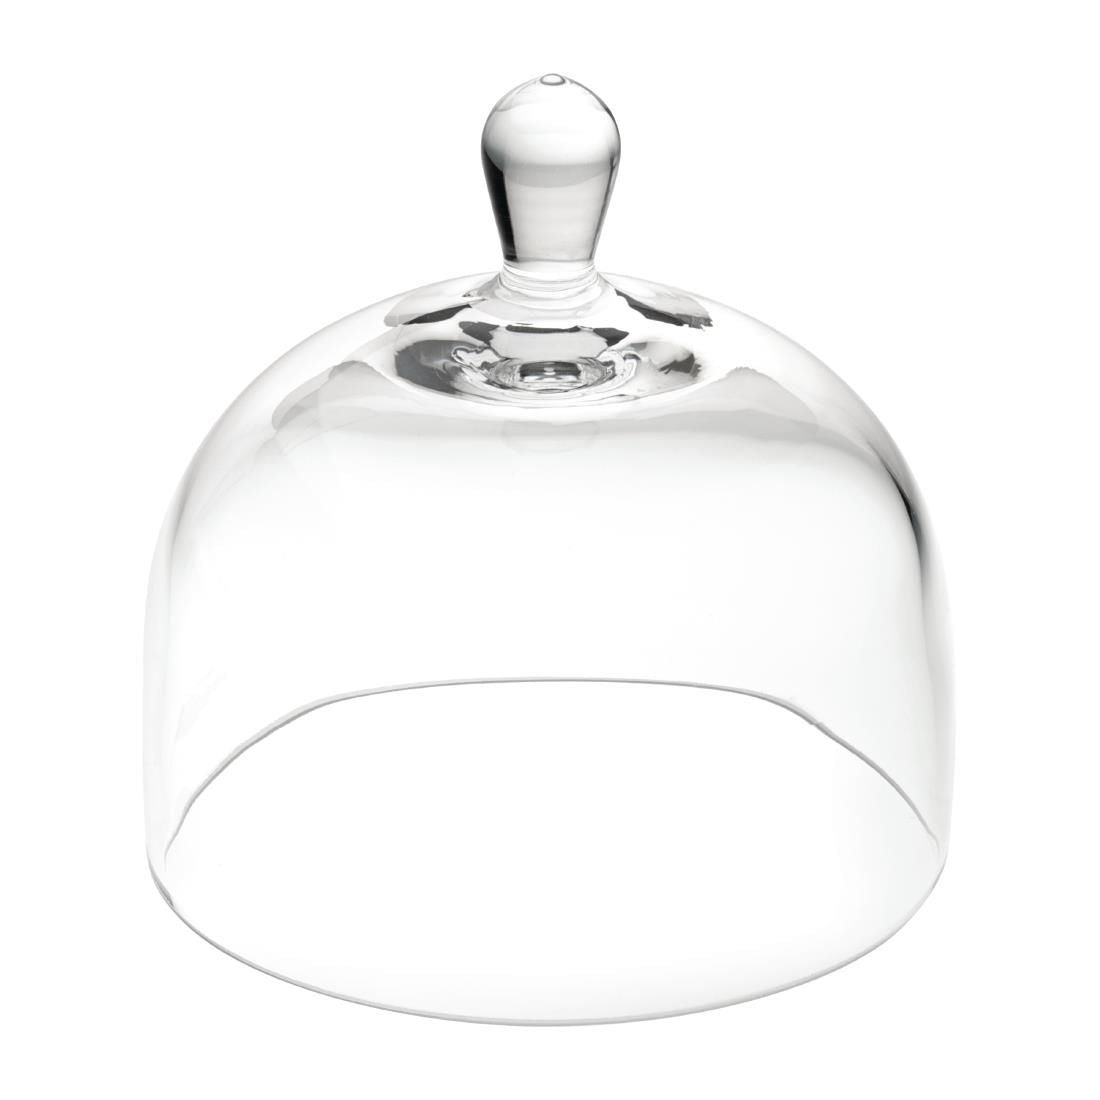 CW550 Utopia Small Glass Cloches (Pack of 6) JD Catering Equipment Solutions Ltd